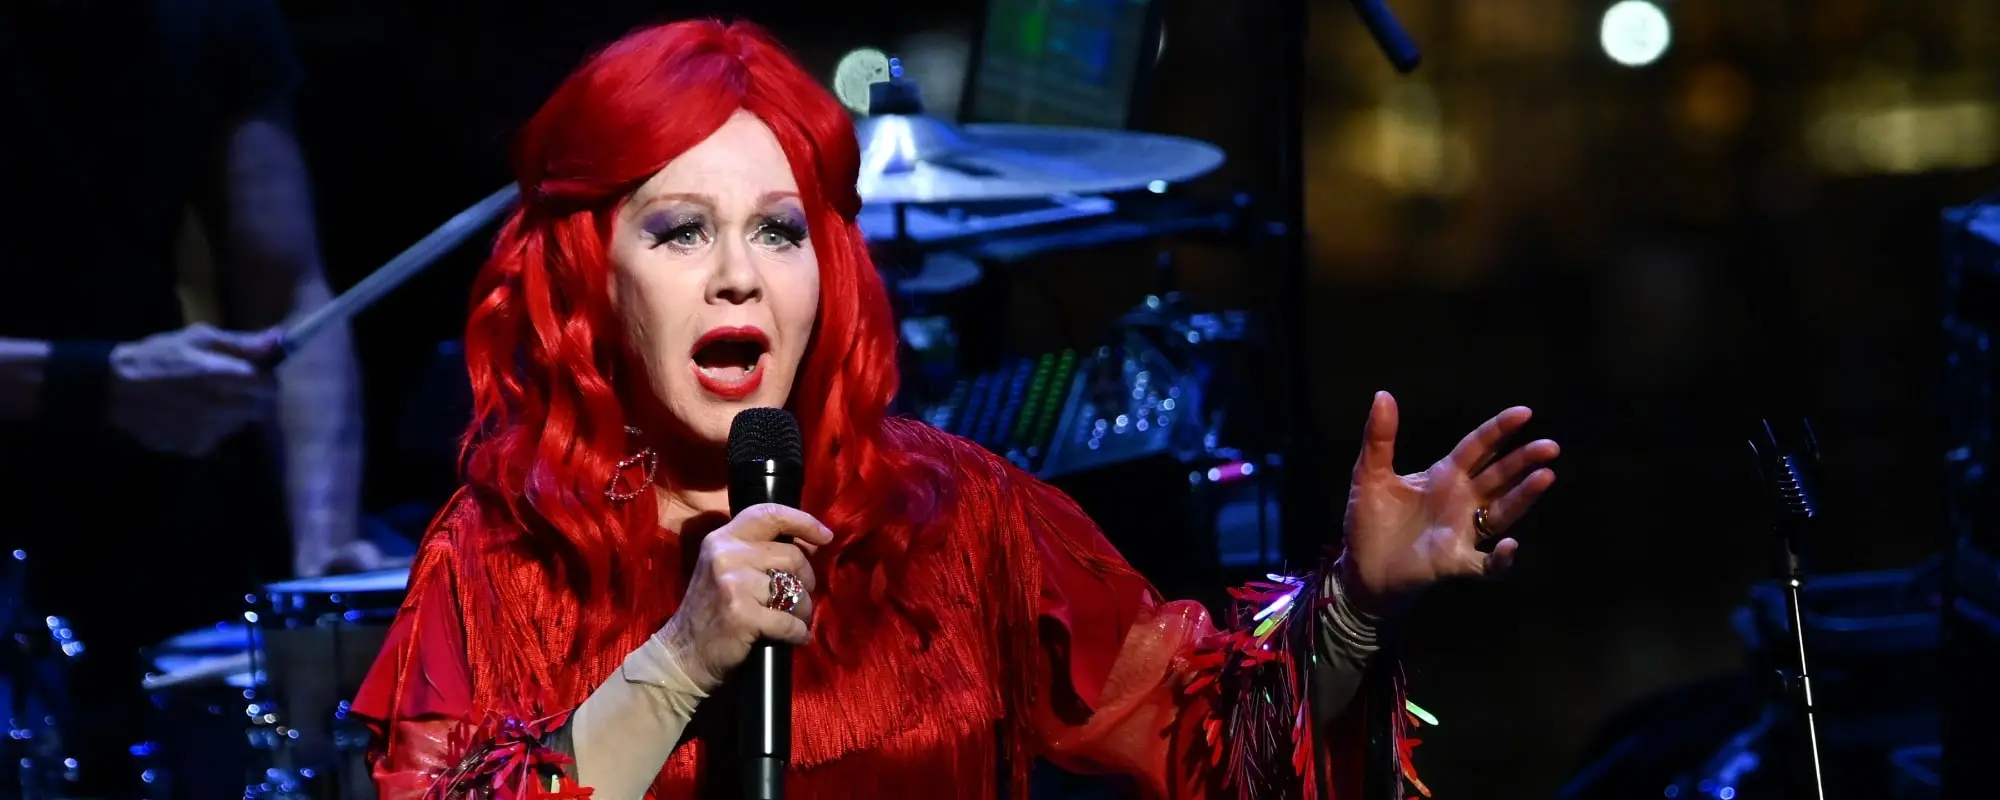 The B-52s’ Kate Pierson Teams with Sia to Bring Spooky Vibes with New Solo Single “Every Day Is Halloween”